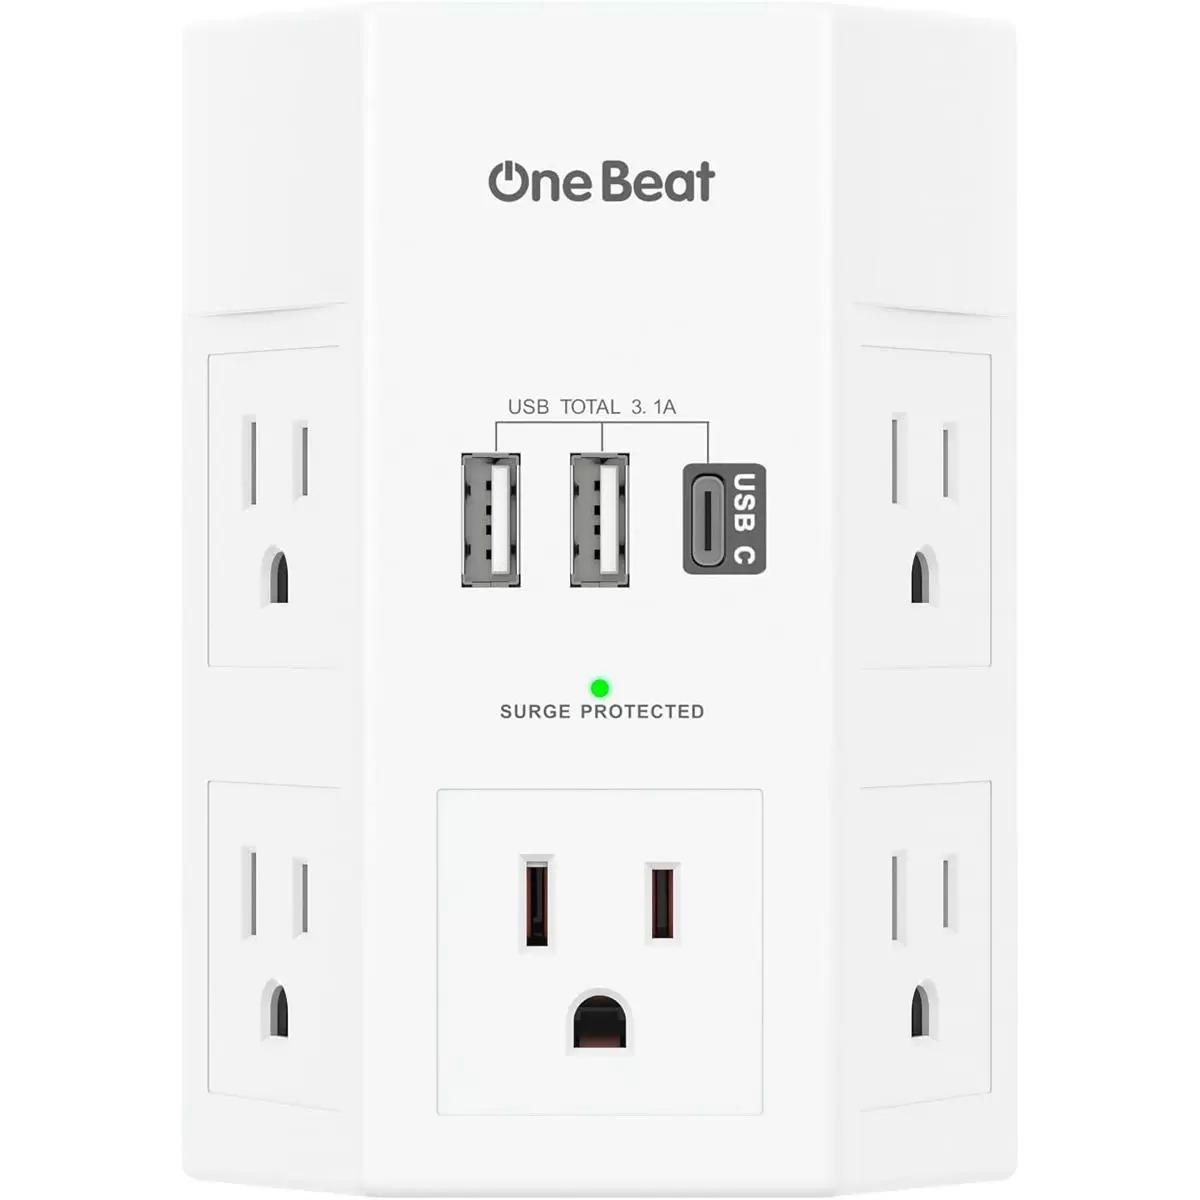 One Beat 5-Outlet + 3 USB Wall Surge Protector for $9.99